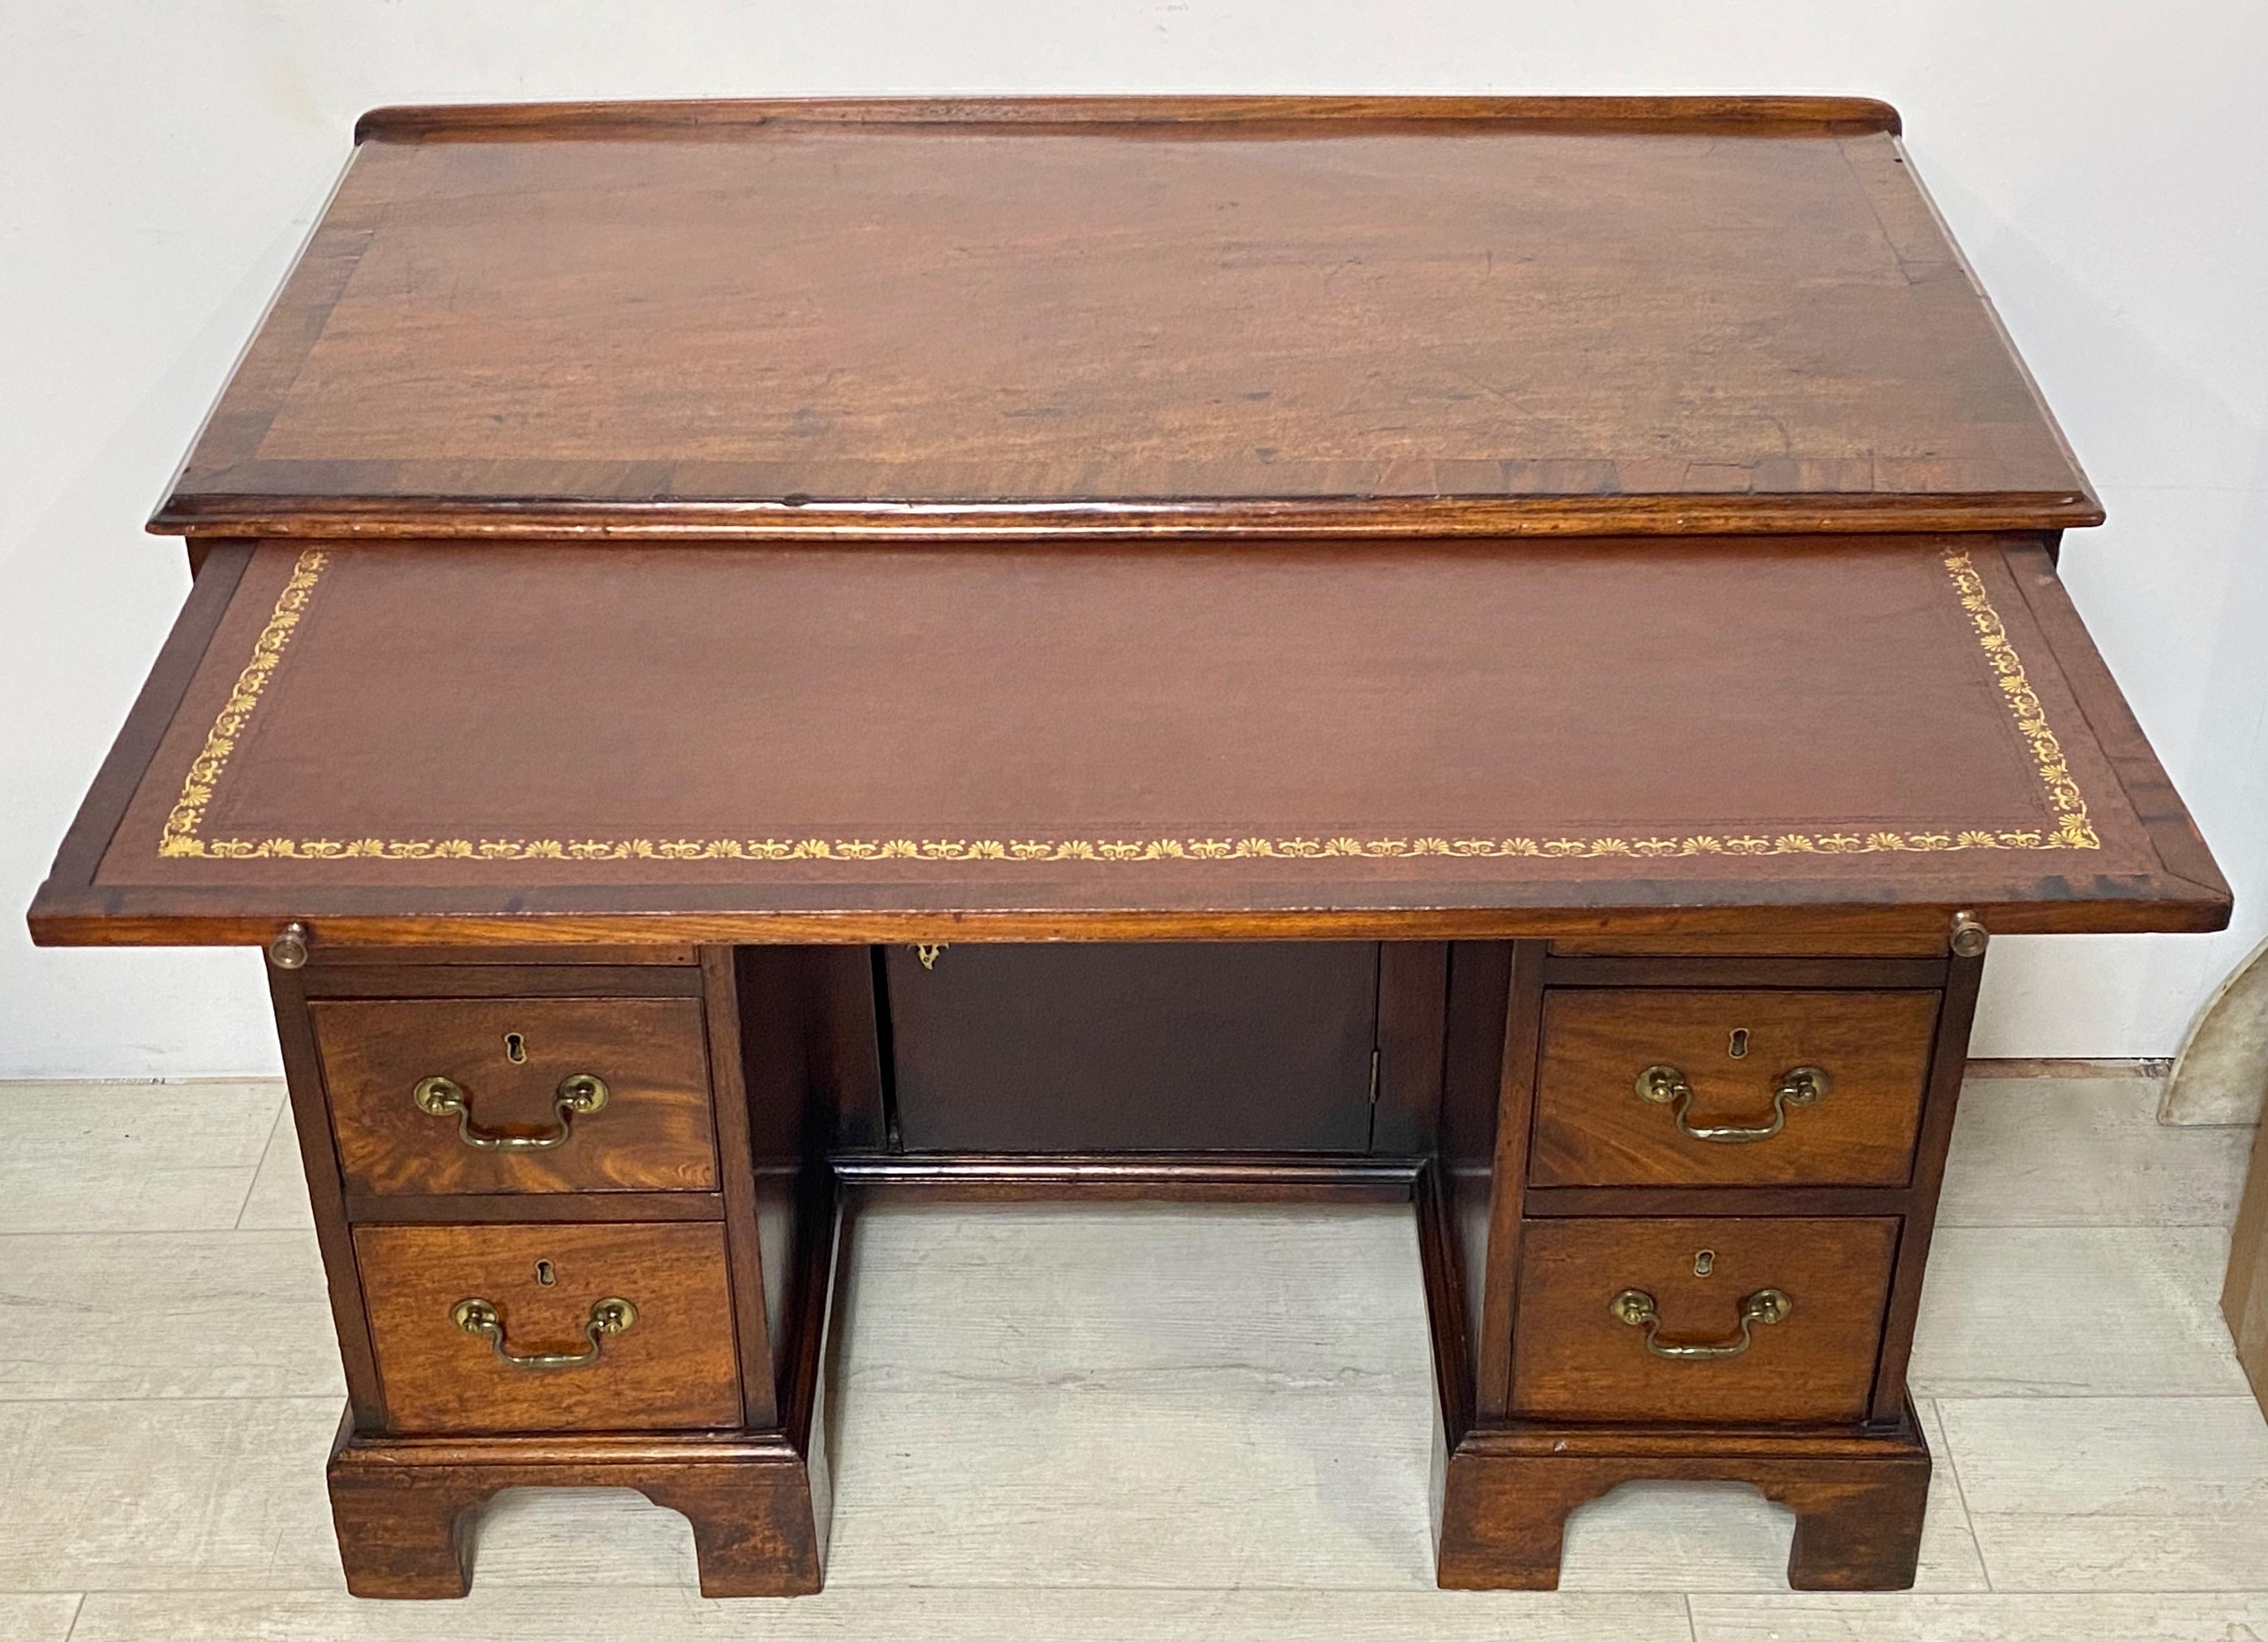 Georgian period mahogany kneehole desk with inset leather slide writing surface decorated with gilt tooling. Having a single full width center drawer over a hinged cupboard door at the center within the kneehole, flanked on either side by three